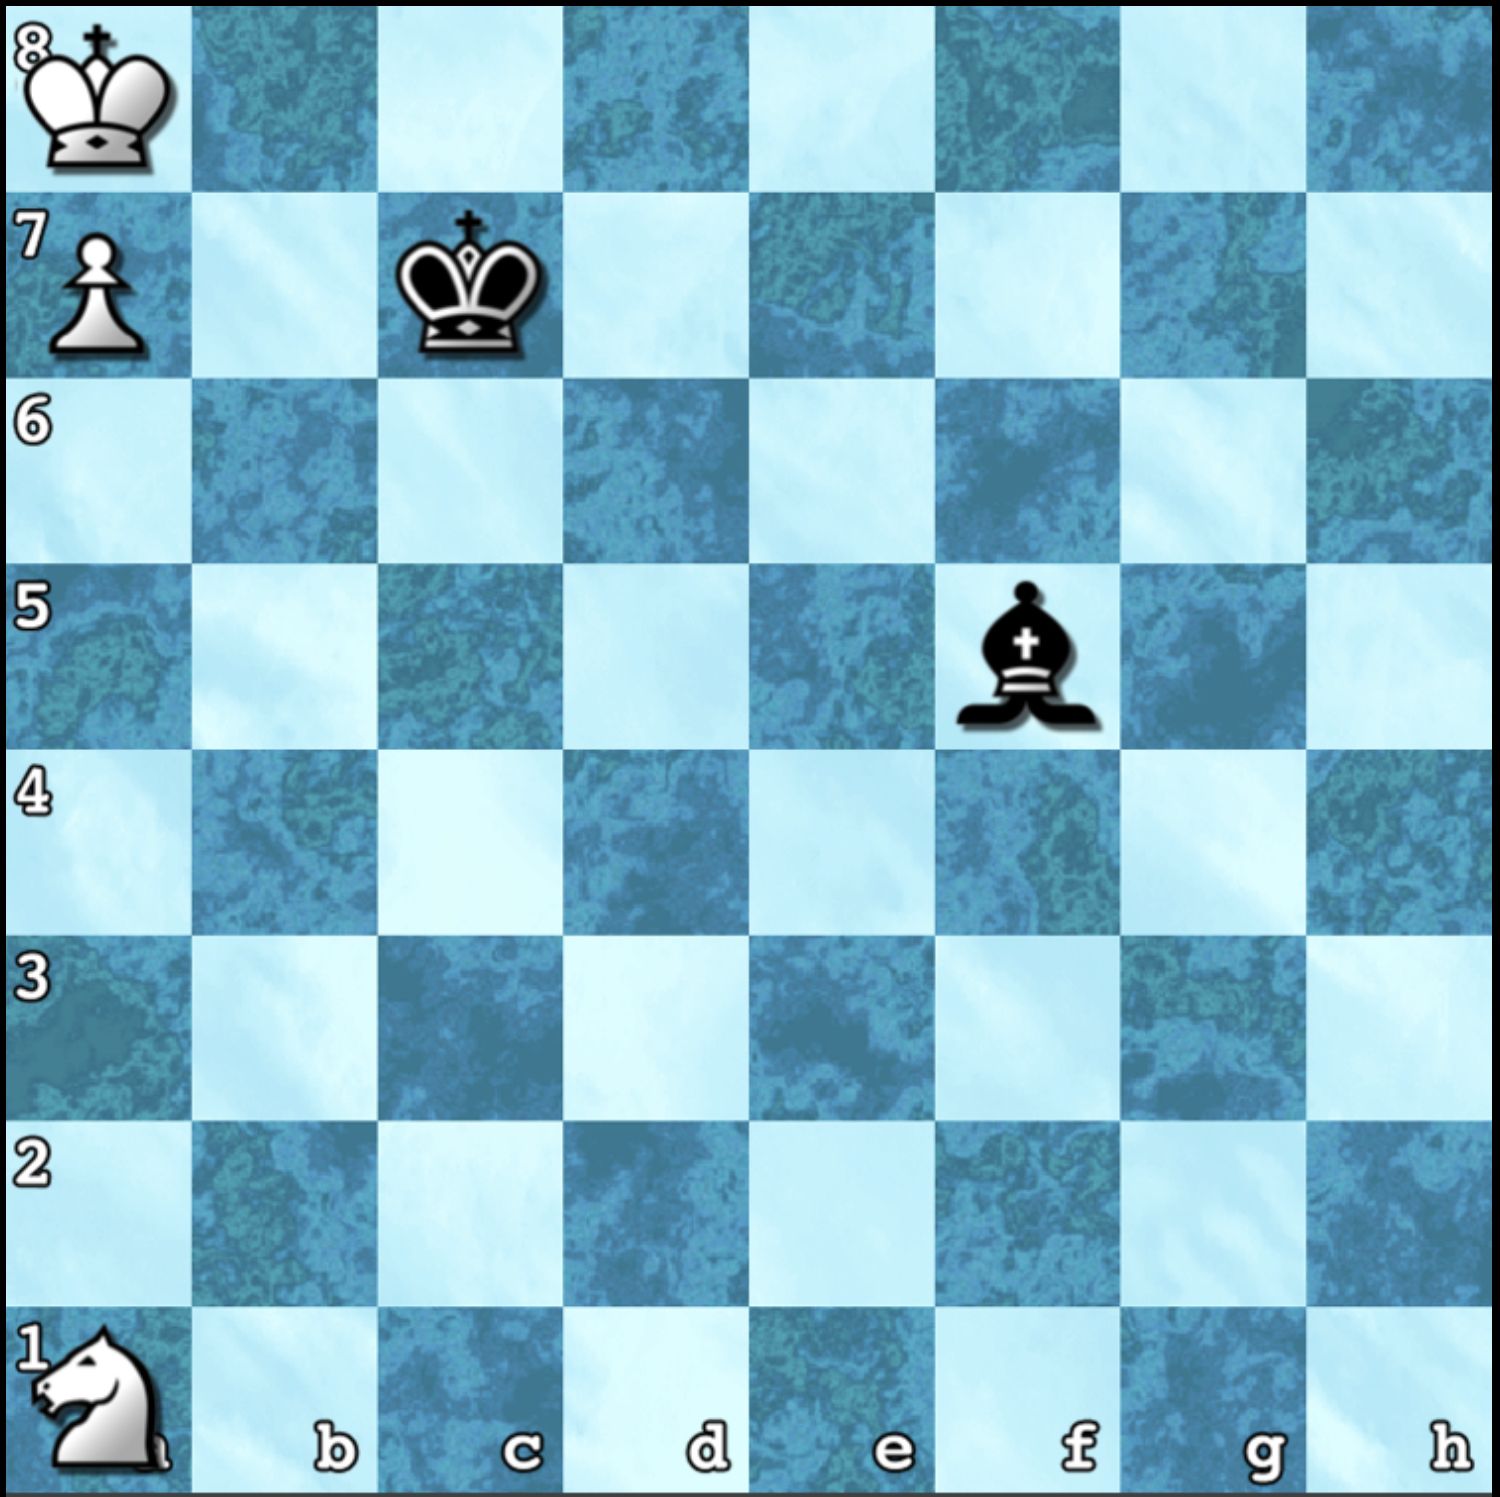 White's rook is stuck, but how can white win here? Based on recent otb game  : r/chess